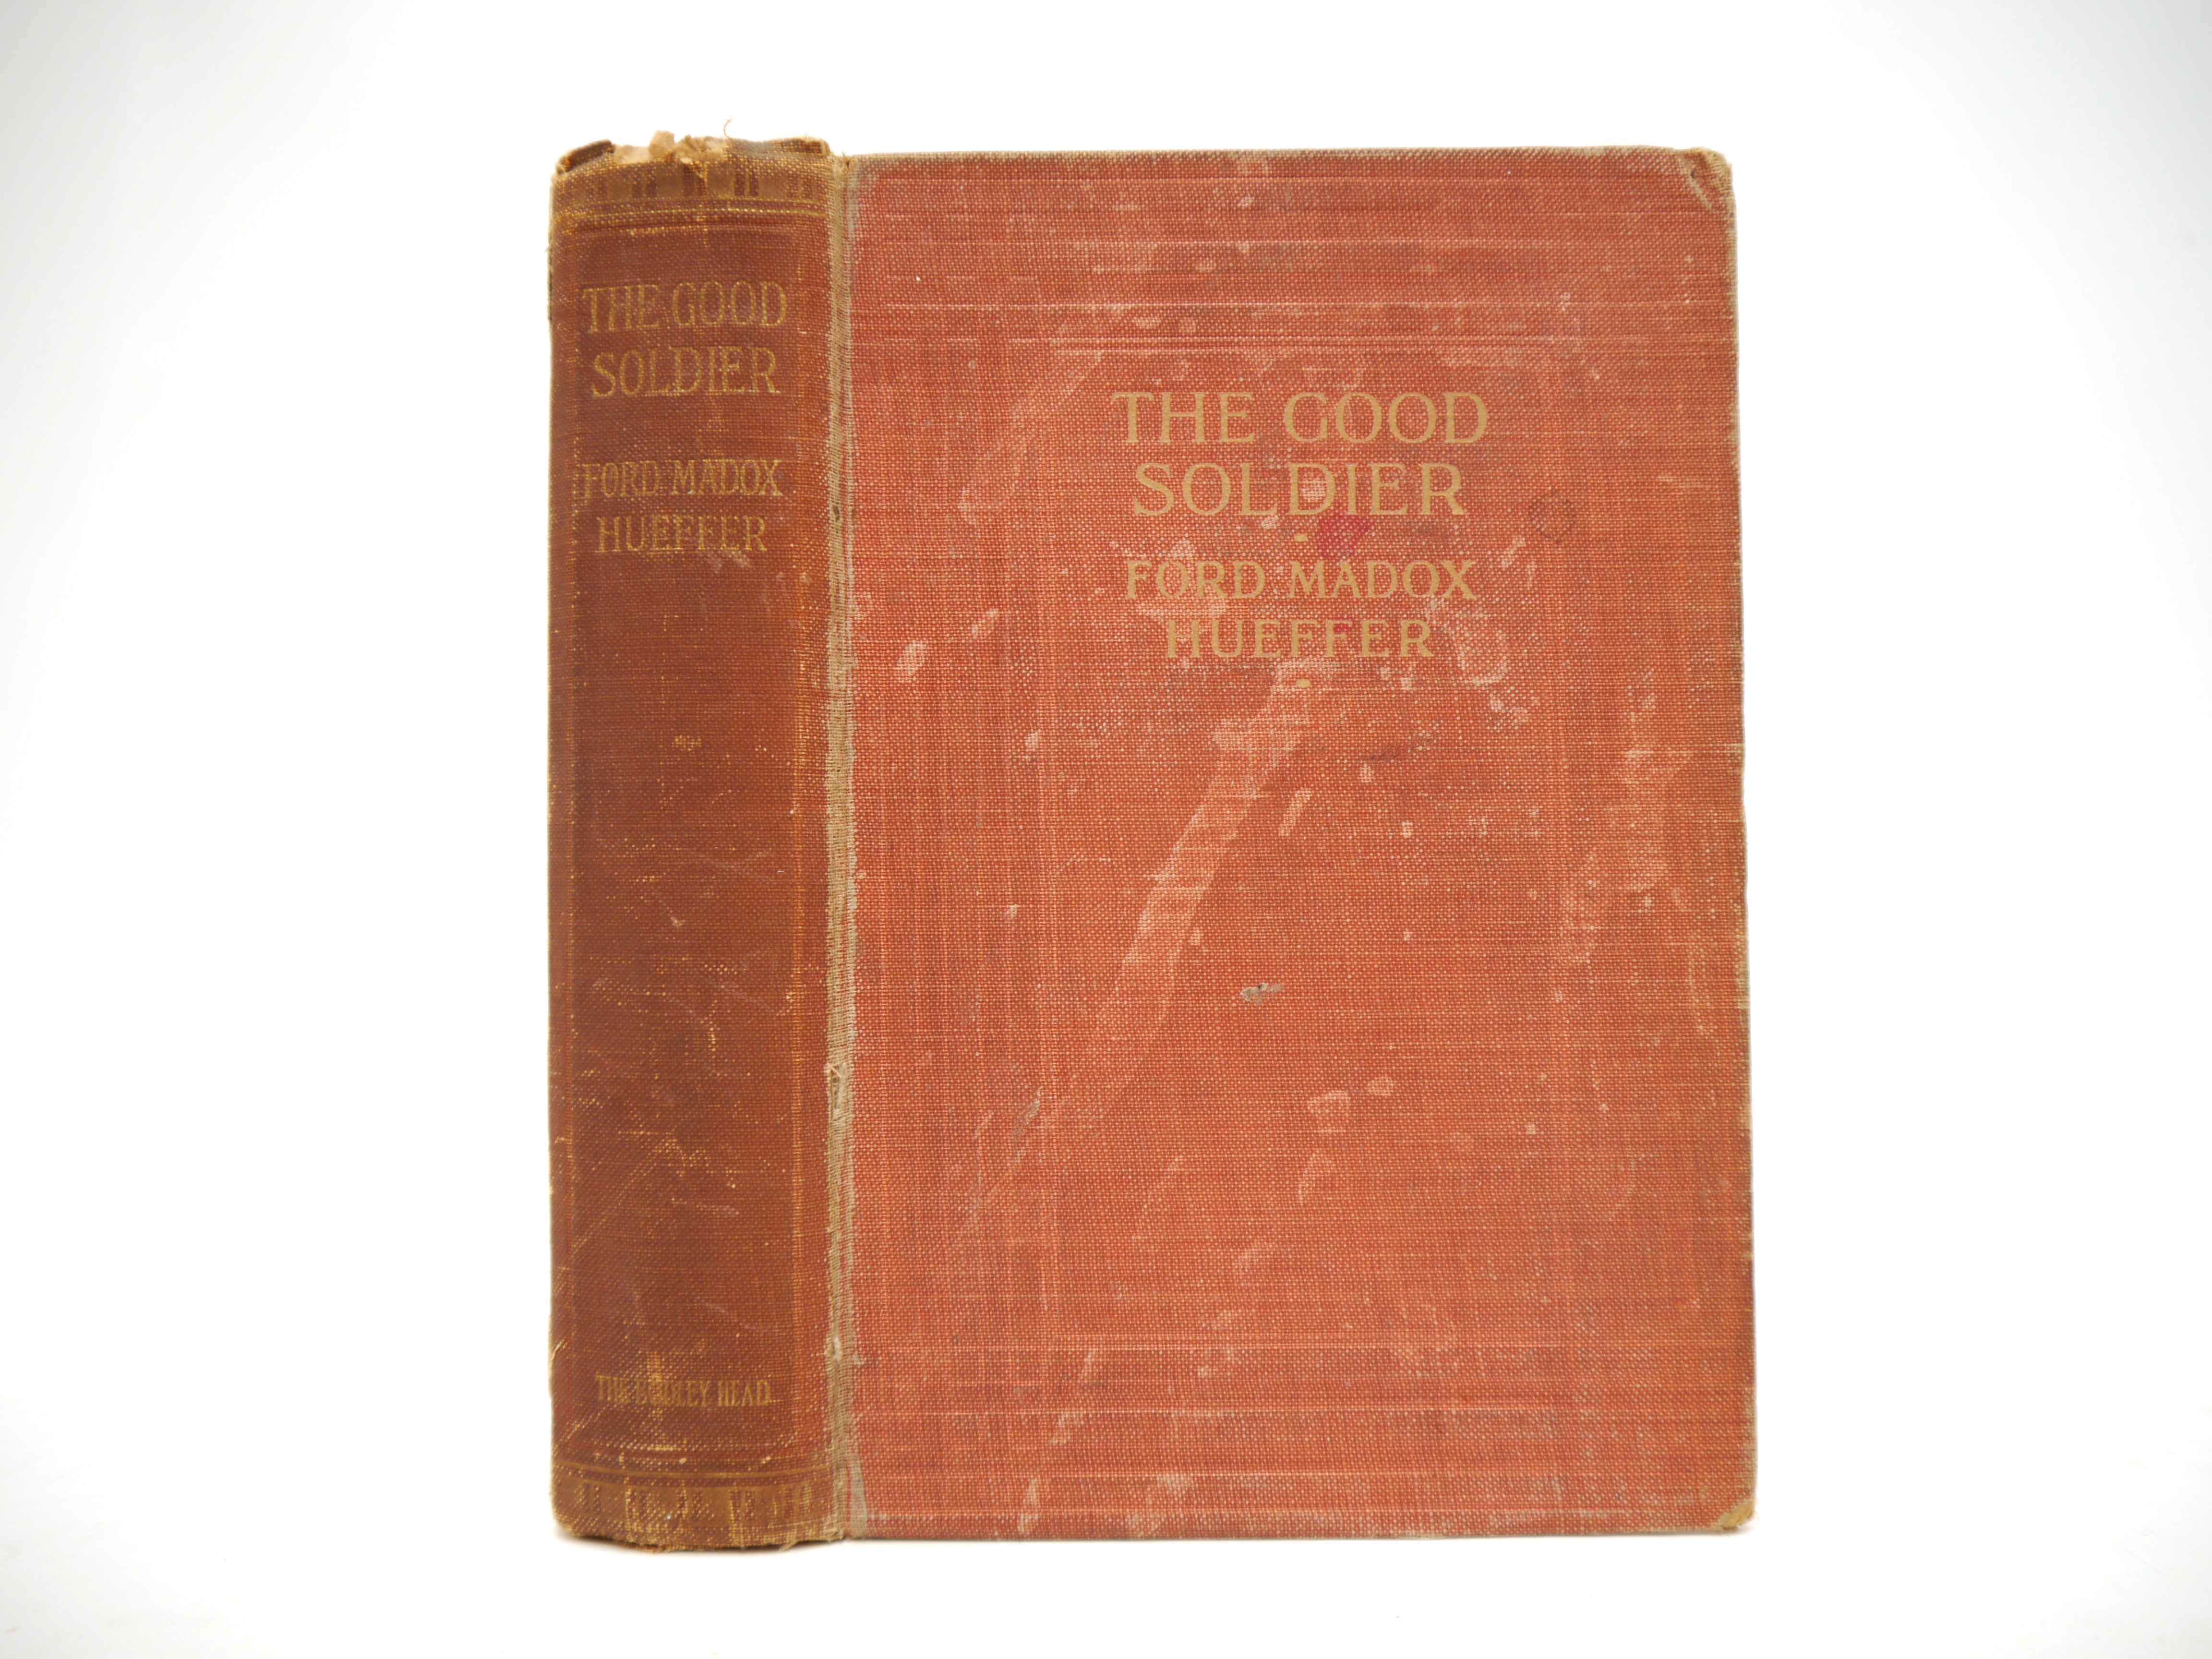 Ford Madox Ford (as Ford Madox Hueffer): 'The Good Soldier: A Tale of Passion', London, John Lane - Image 6 of 10